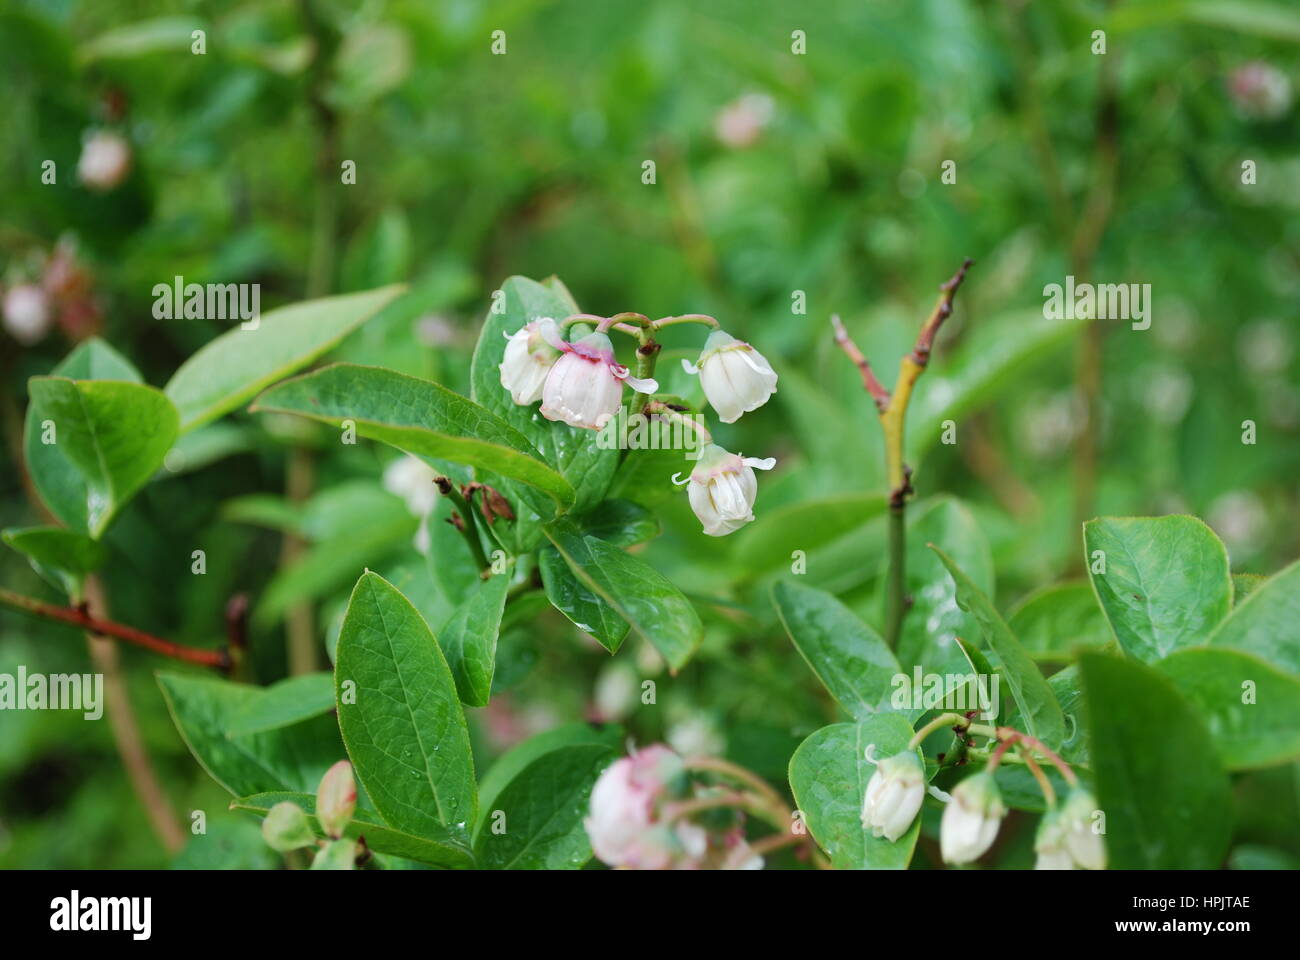 Blueberries bloom (white flowers) in the forest. Stock Photo